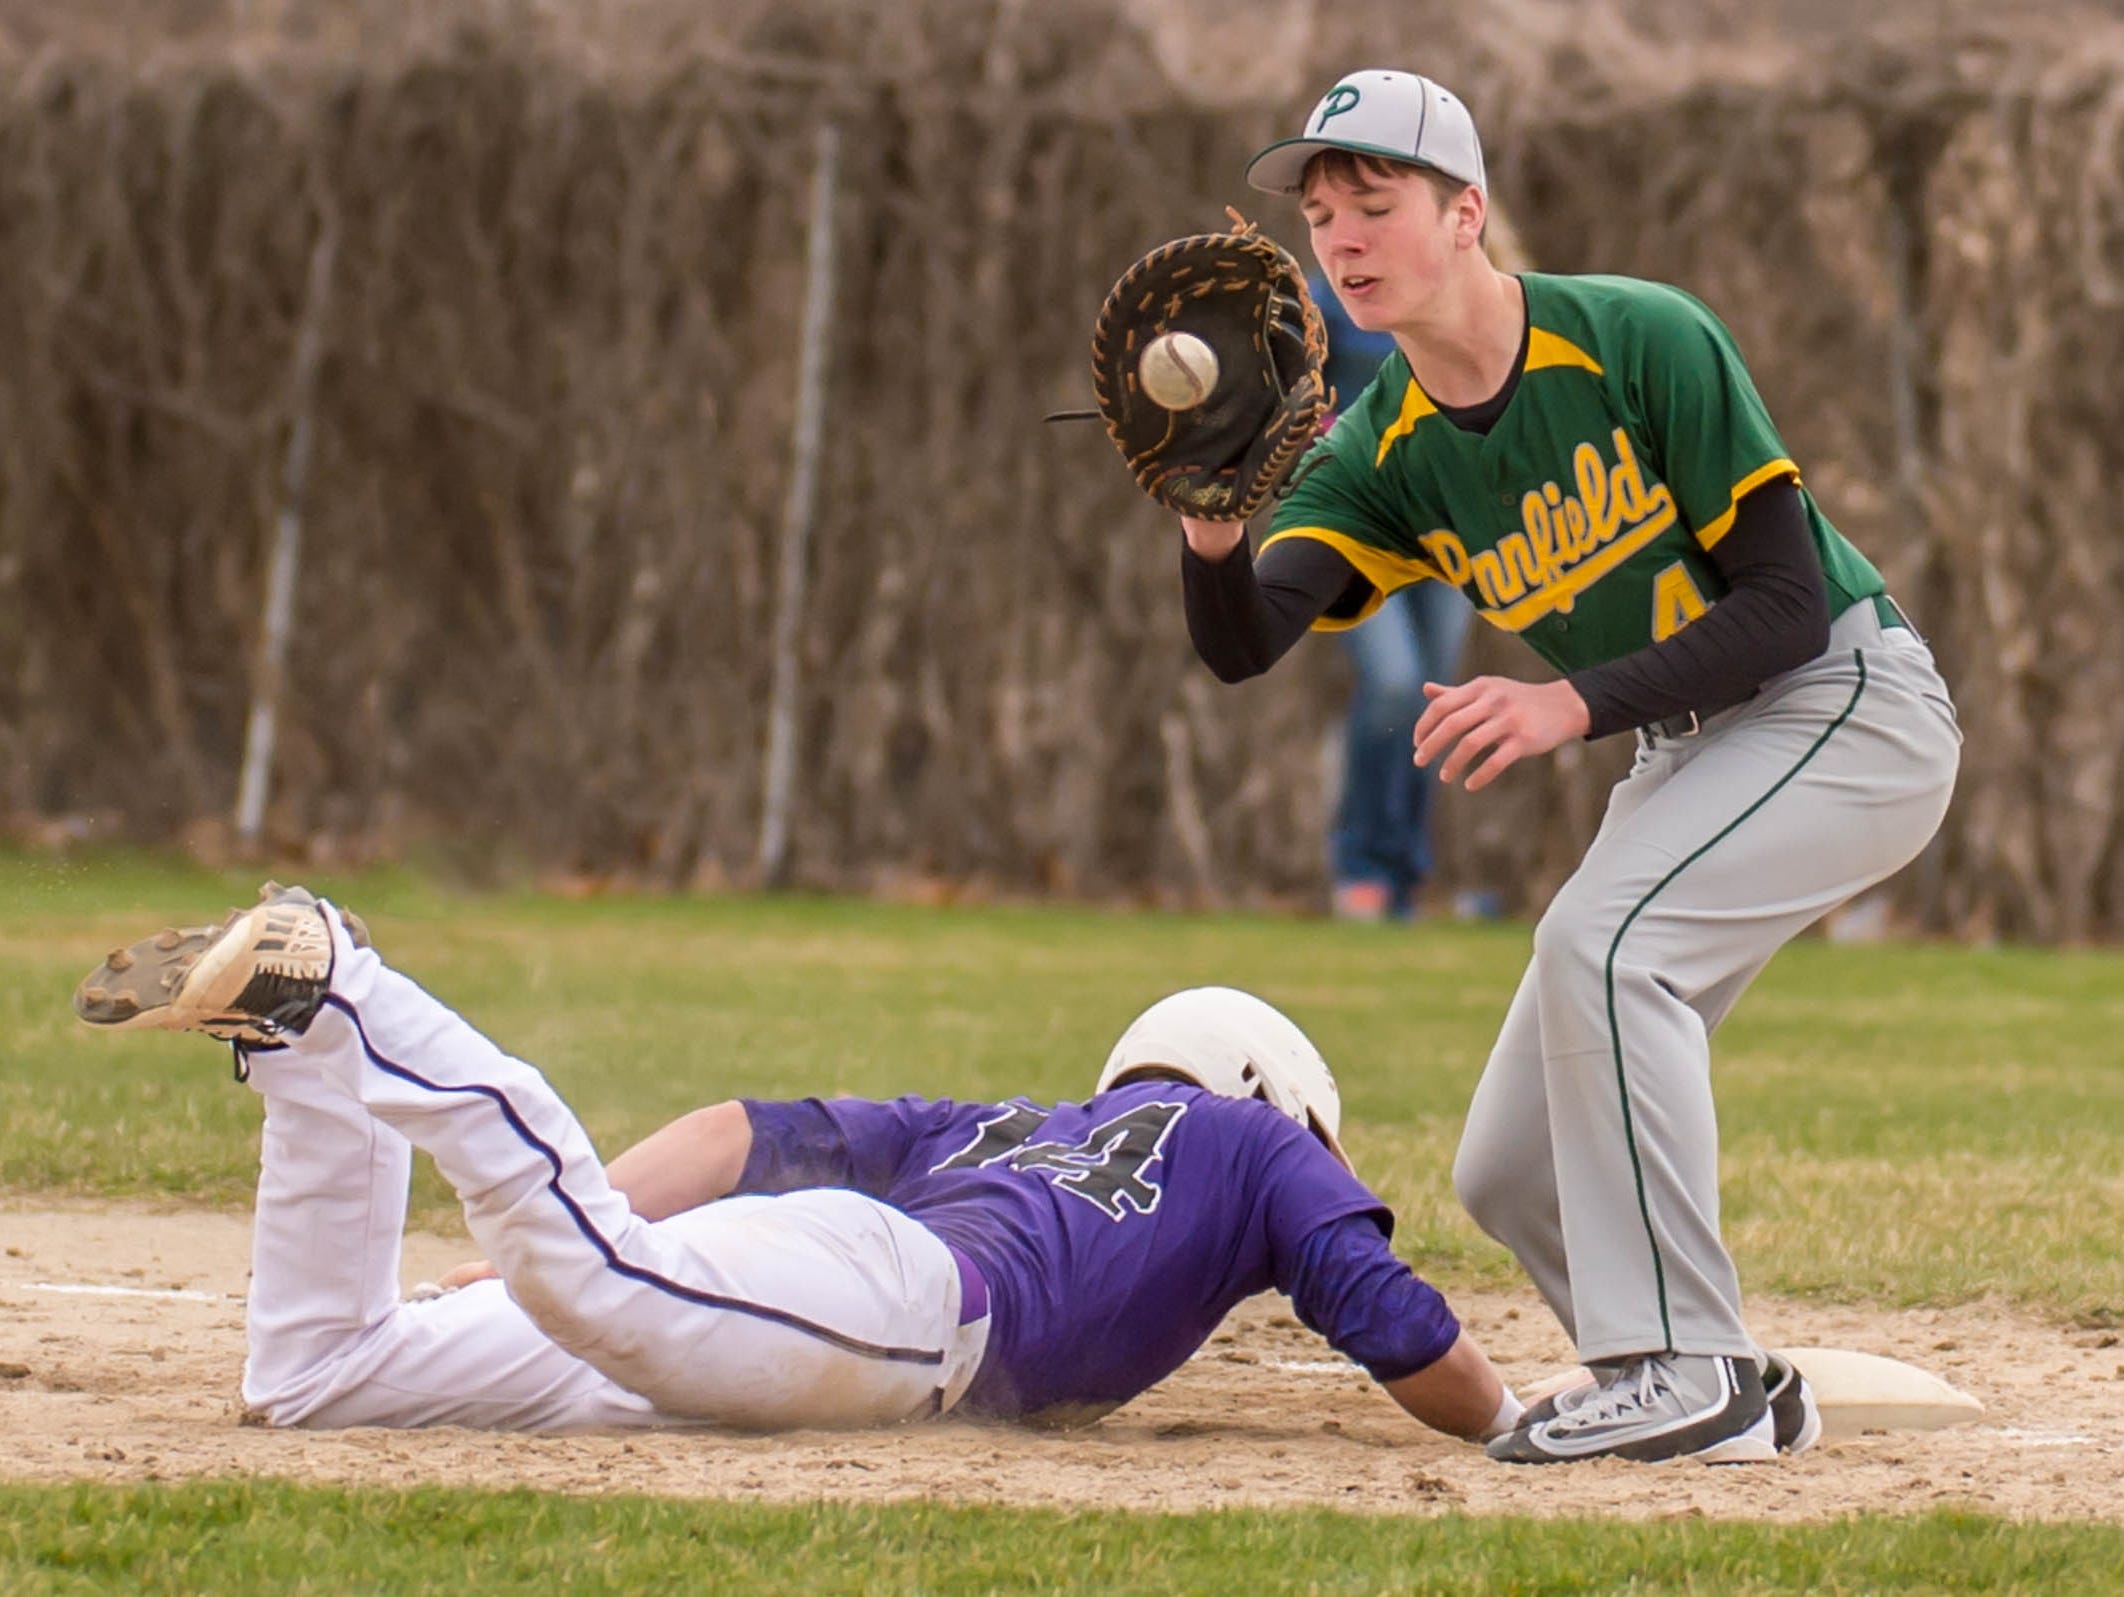 Pennfield's Logan Saxton gets the throw to first as Lakeview's Skyler Nichols (14) slides back safe.